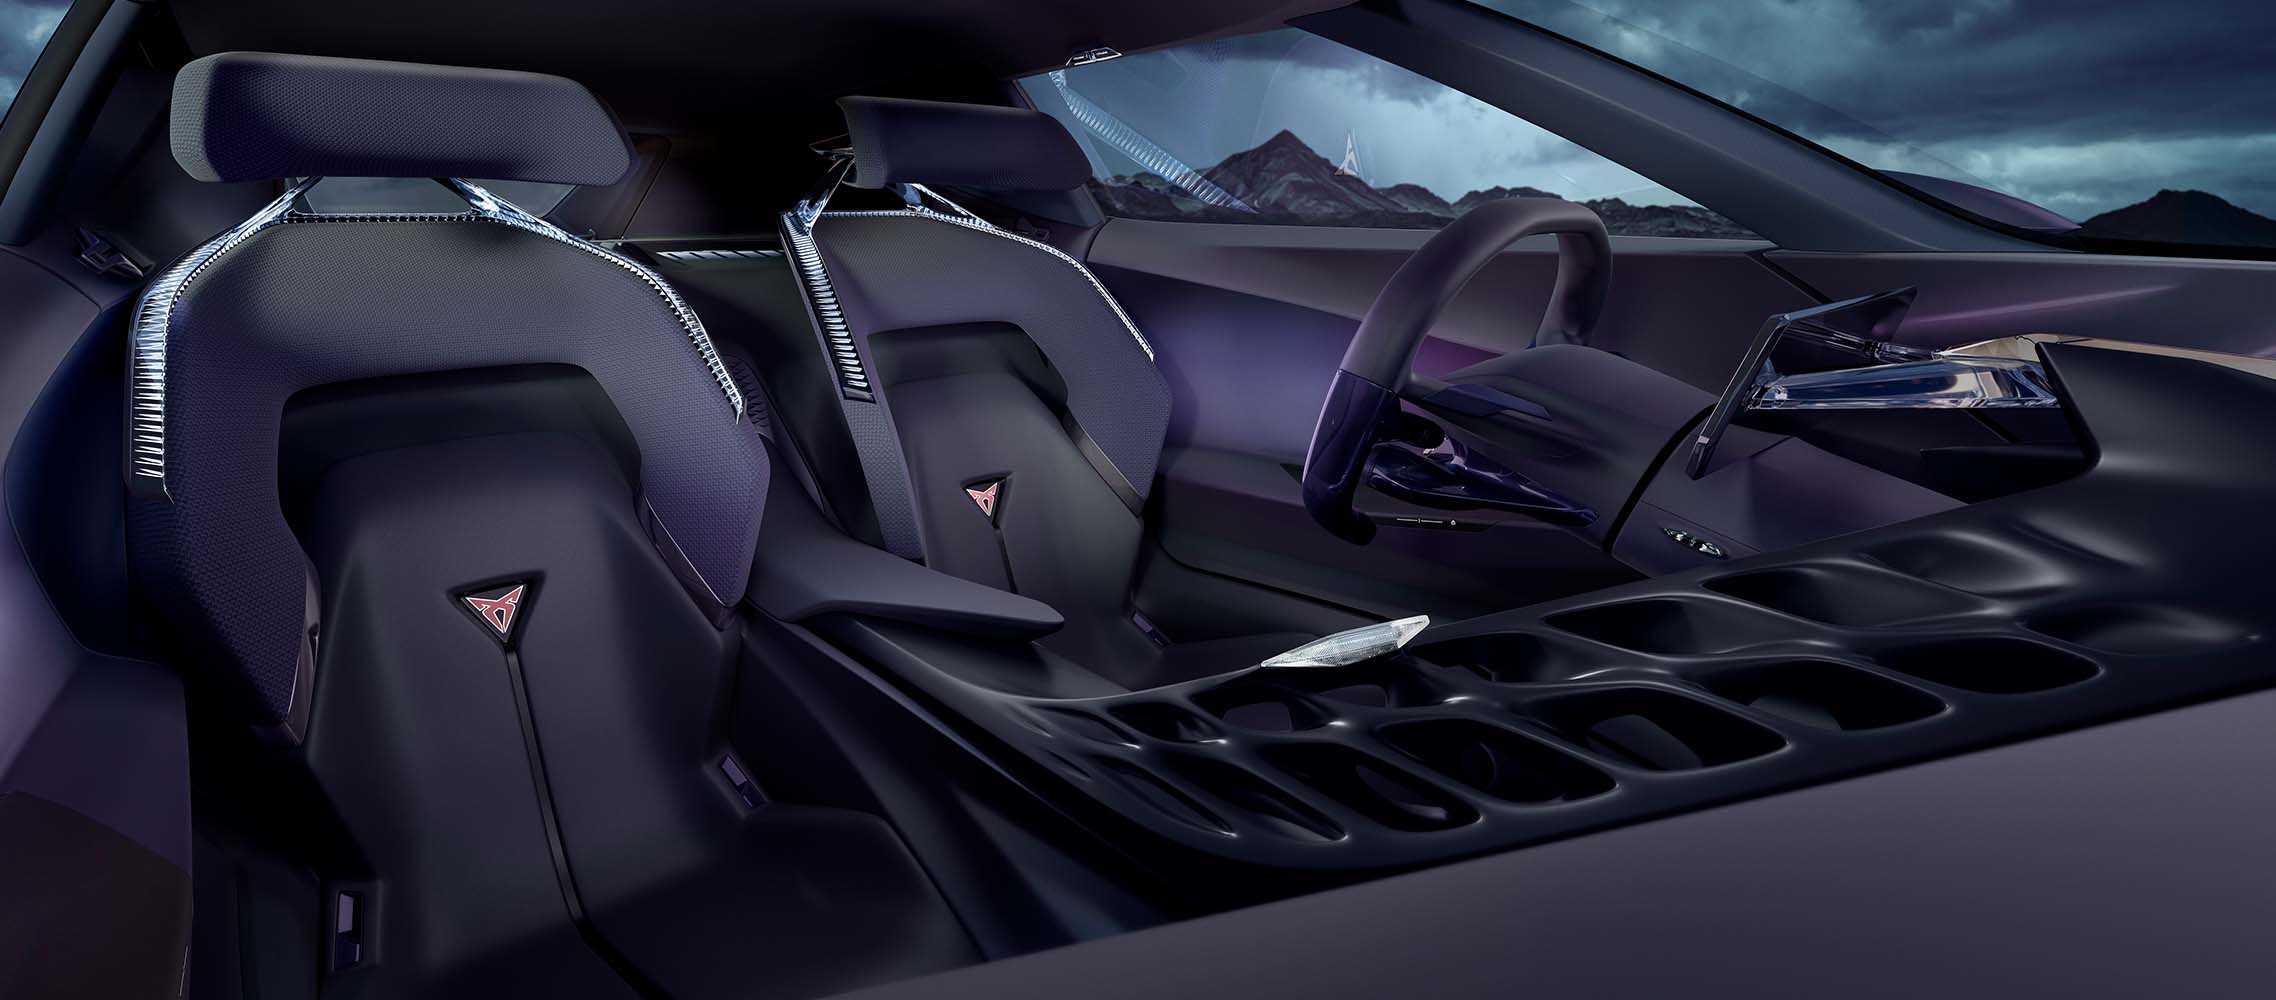 CUPRA DarkRebel car’s front bucket seats with CUPRA logos, central spine, gamified steering wheel and infotainment system.